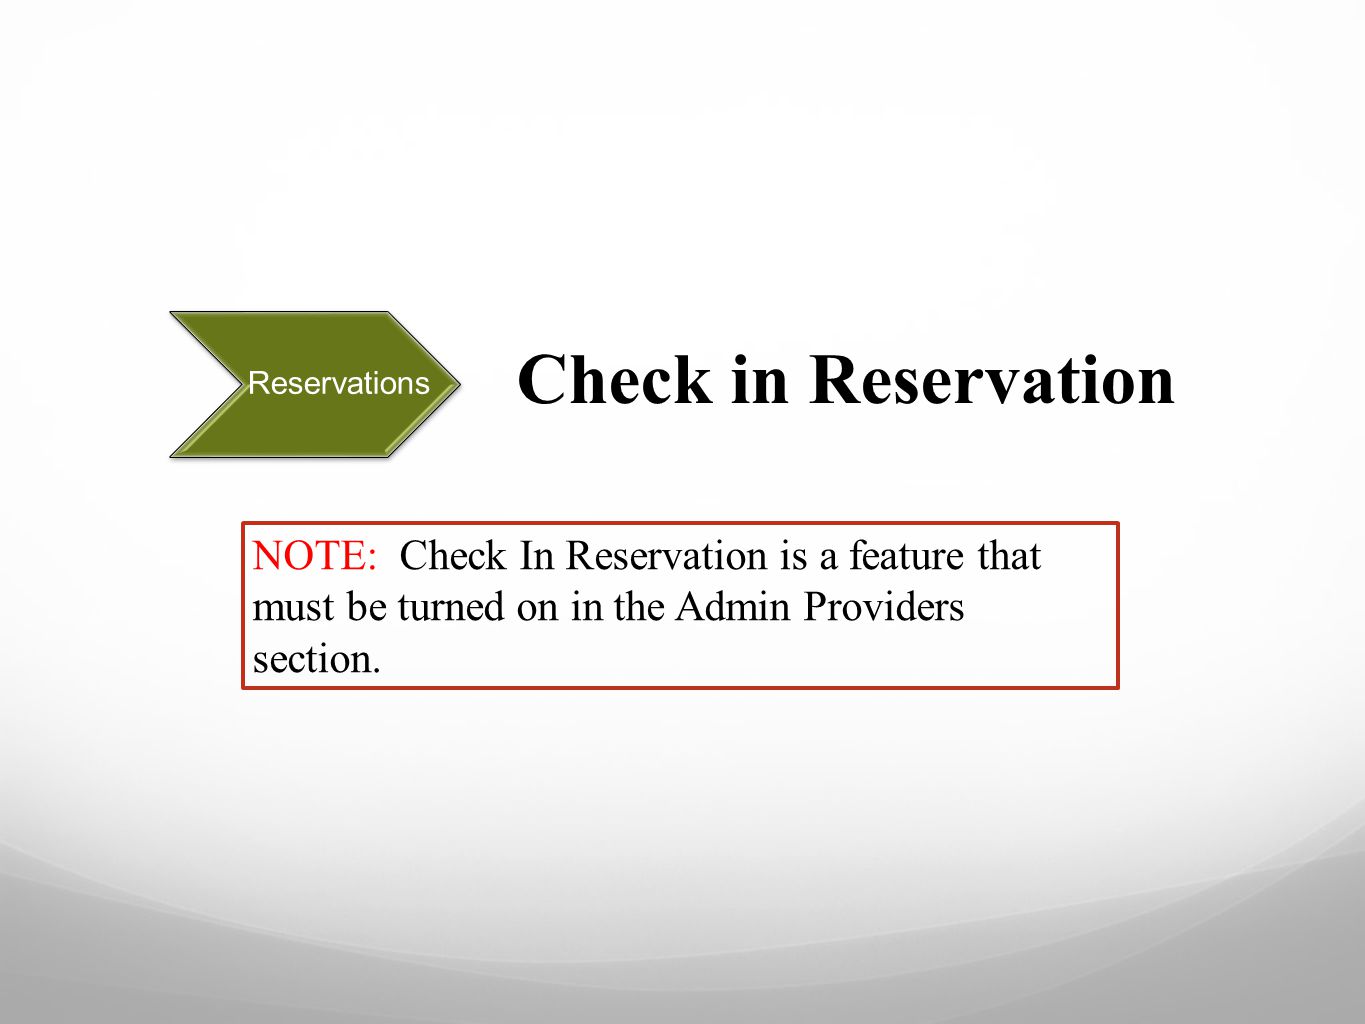 Reservations Check in Reservation NOTE: Check In Reservation is a feature that must be turned on in the Admin Providers section.